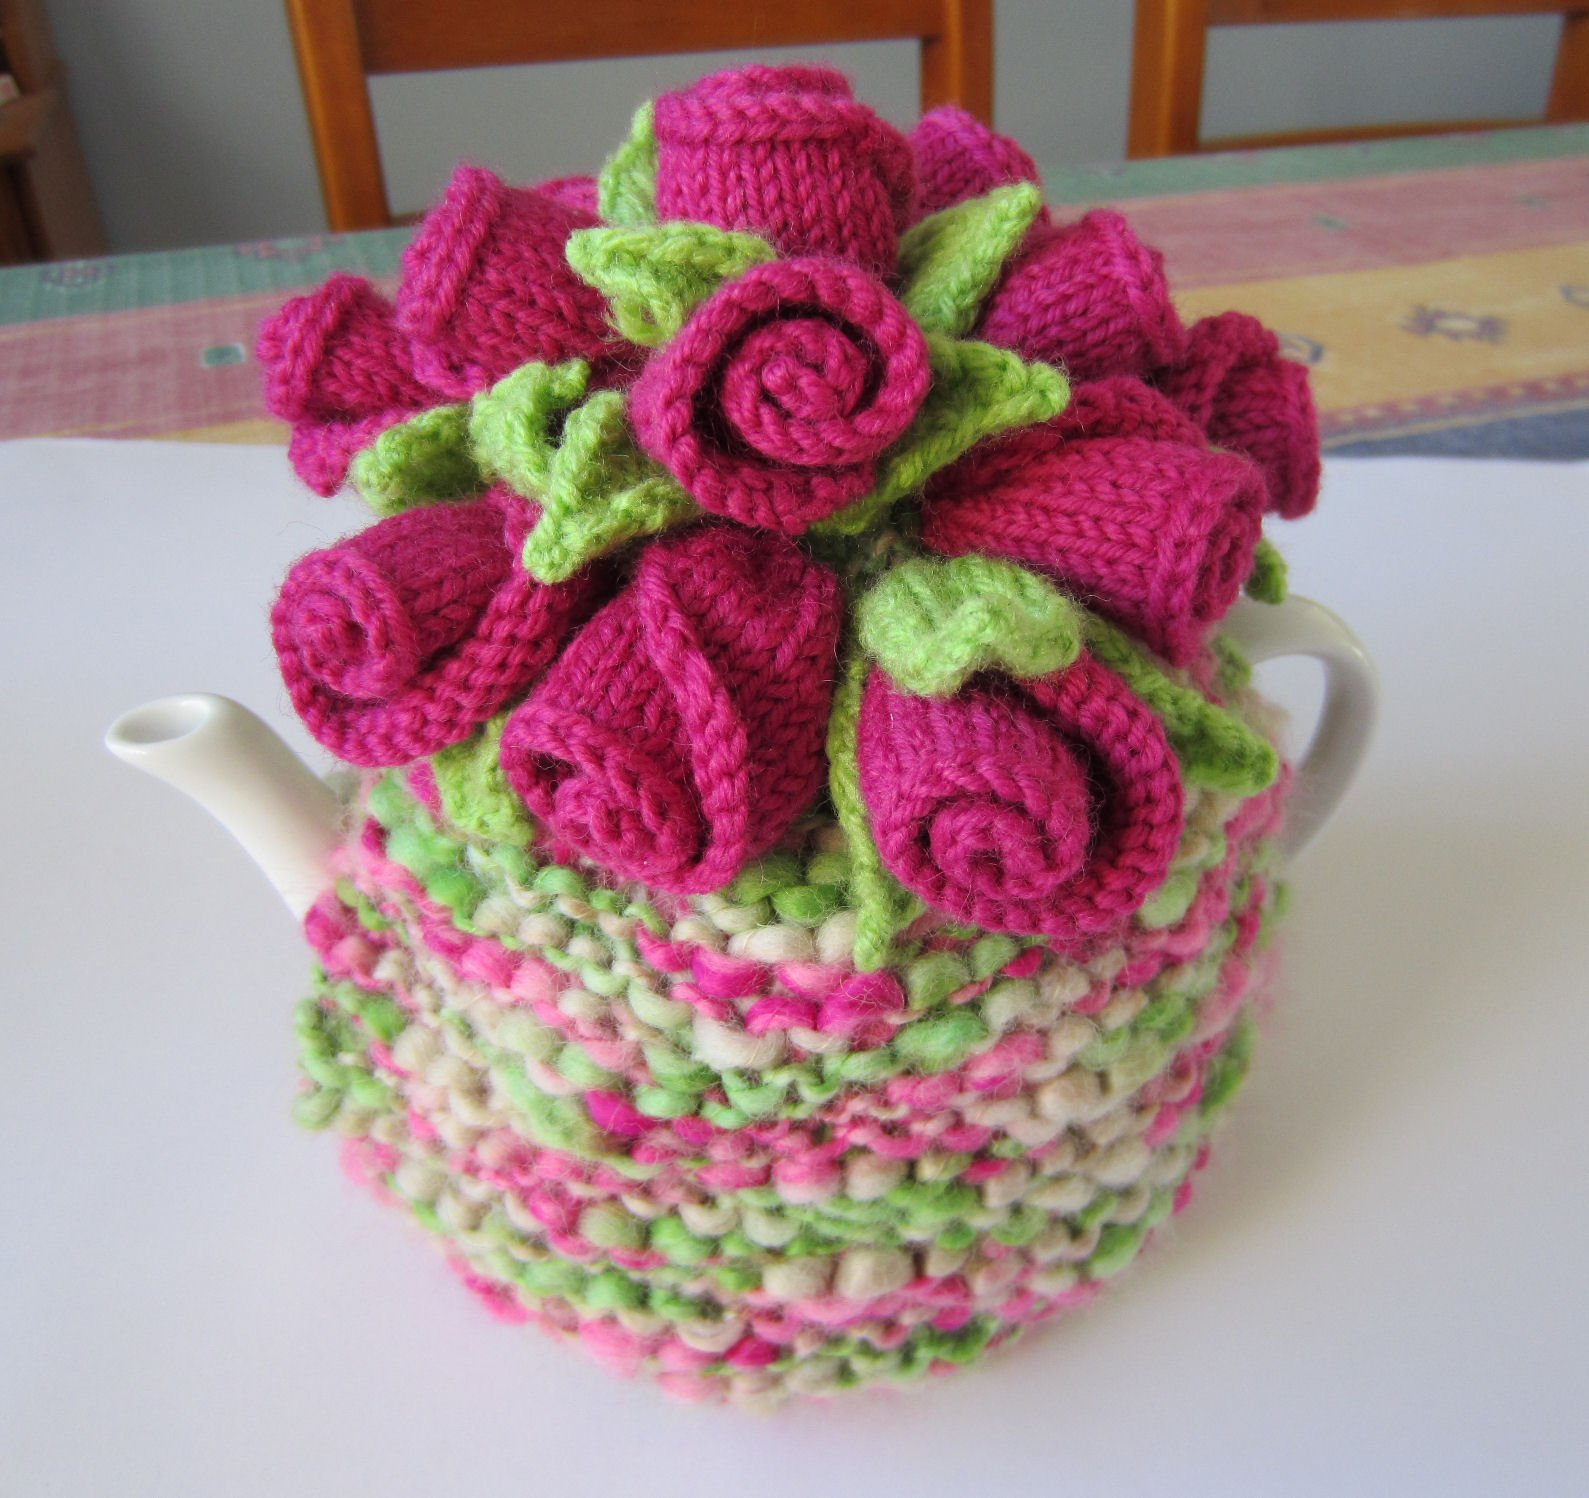 20+ Handmade Tea Cozy with Patterns - Page 2 of 3